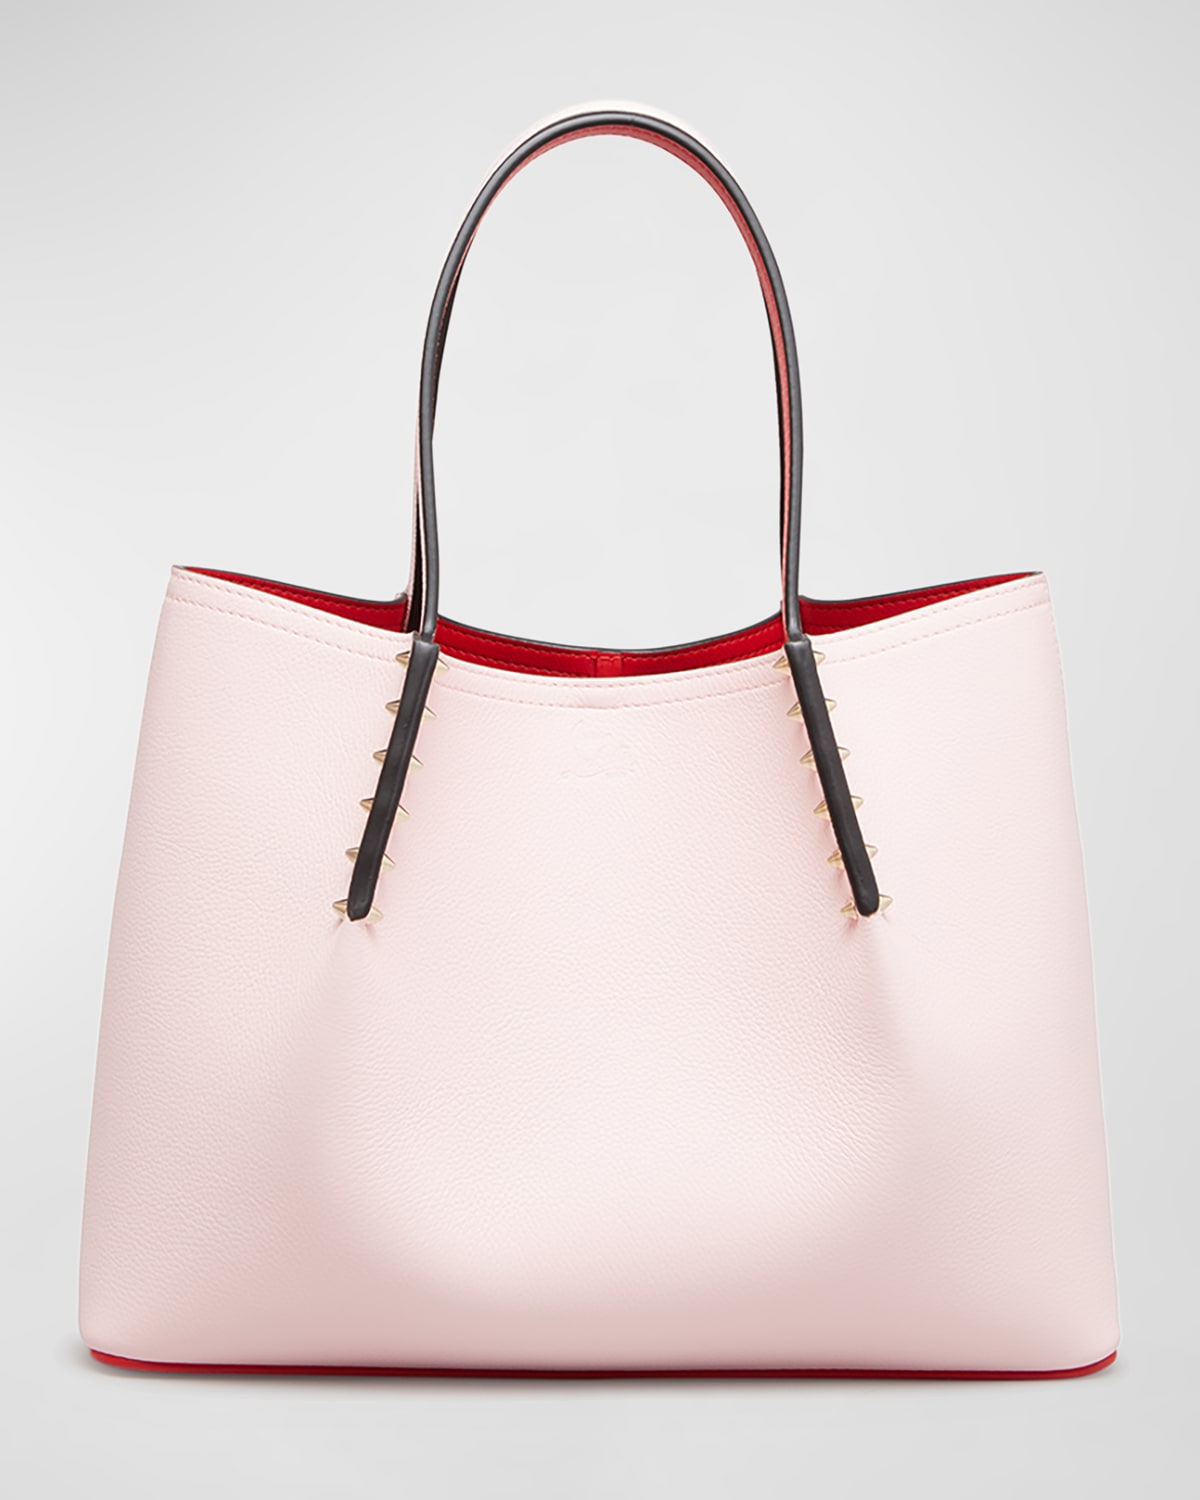 Christian Louboutin Cabarock Small Spike Red Sole Tote Bag